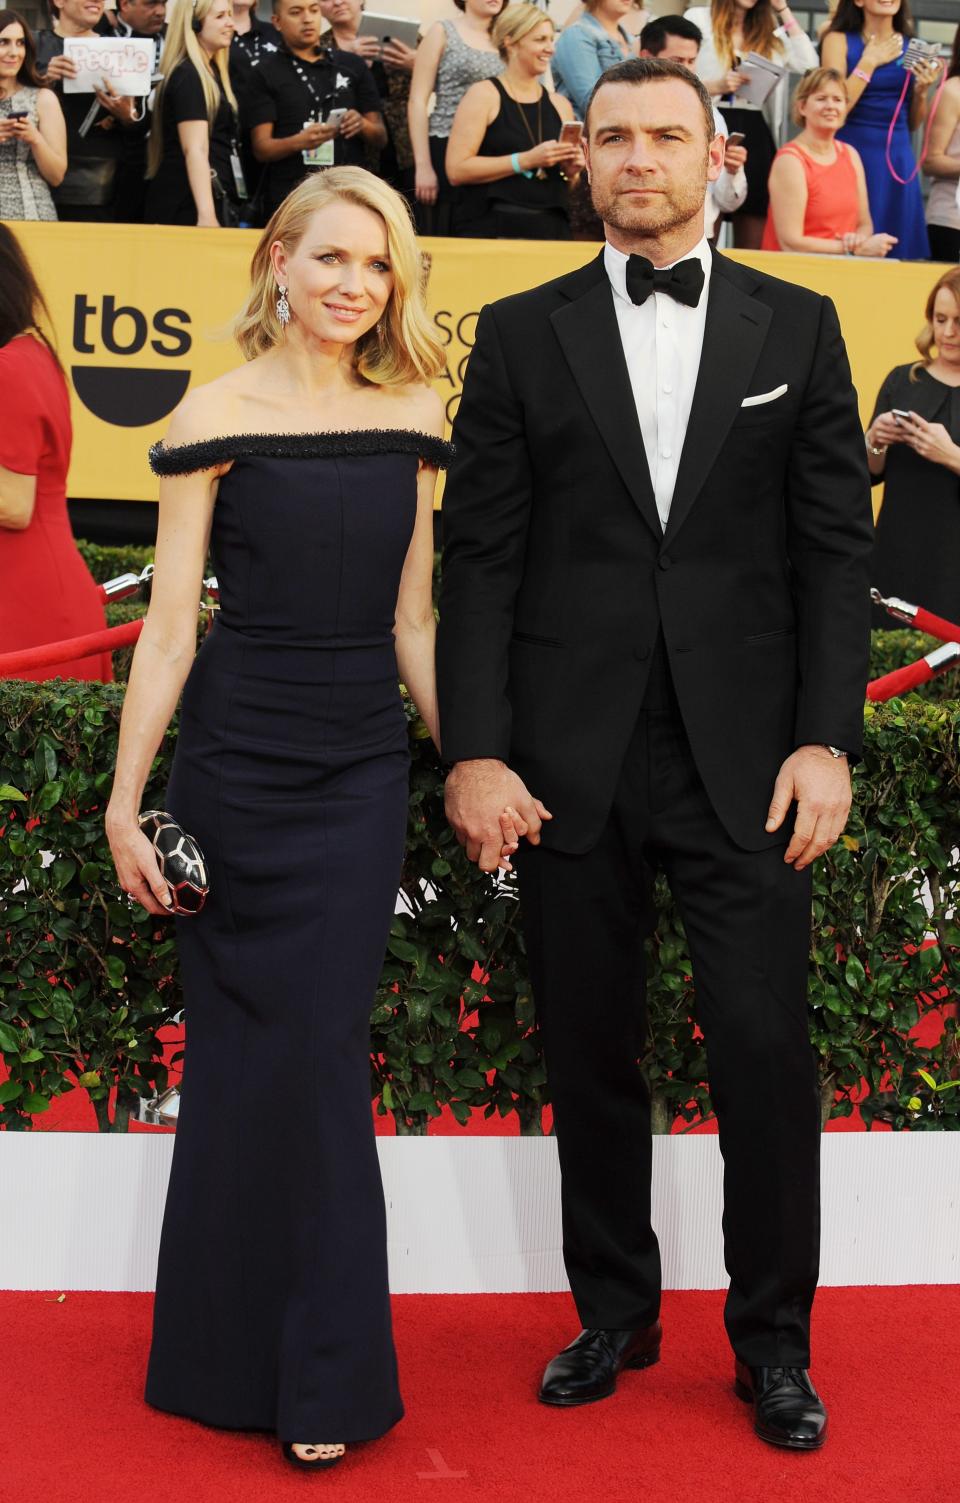 19 Power Couples Who Rocked the Red Carpet at the SAG Awards